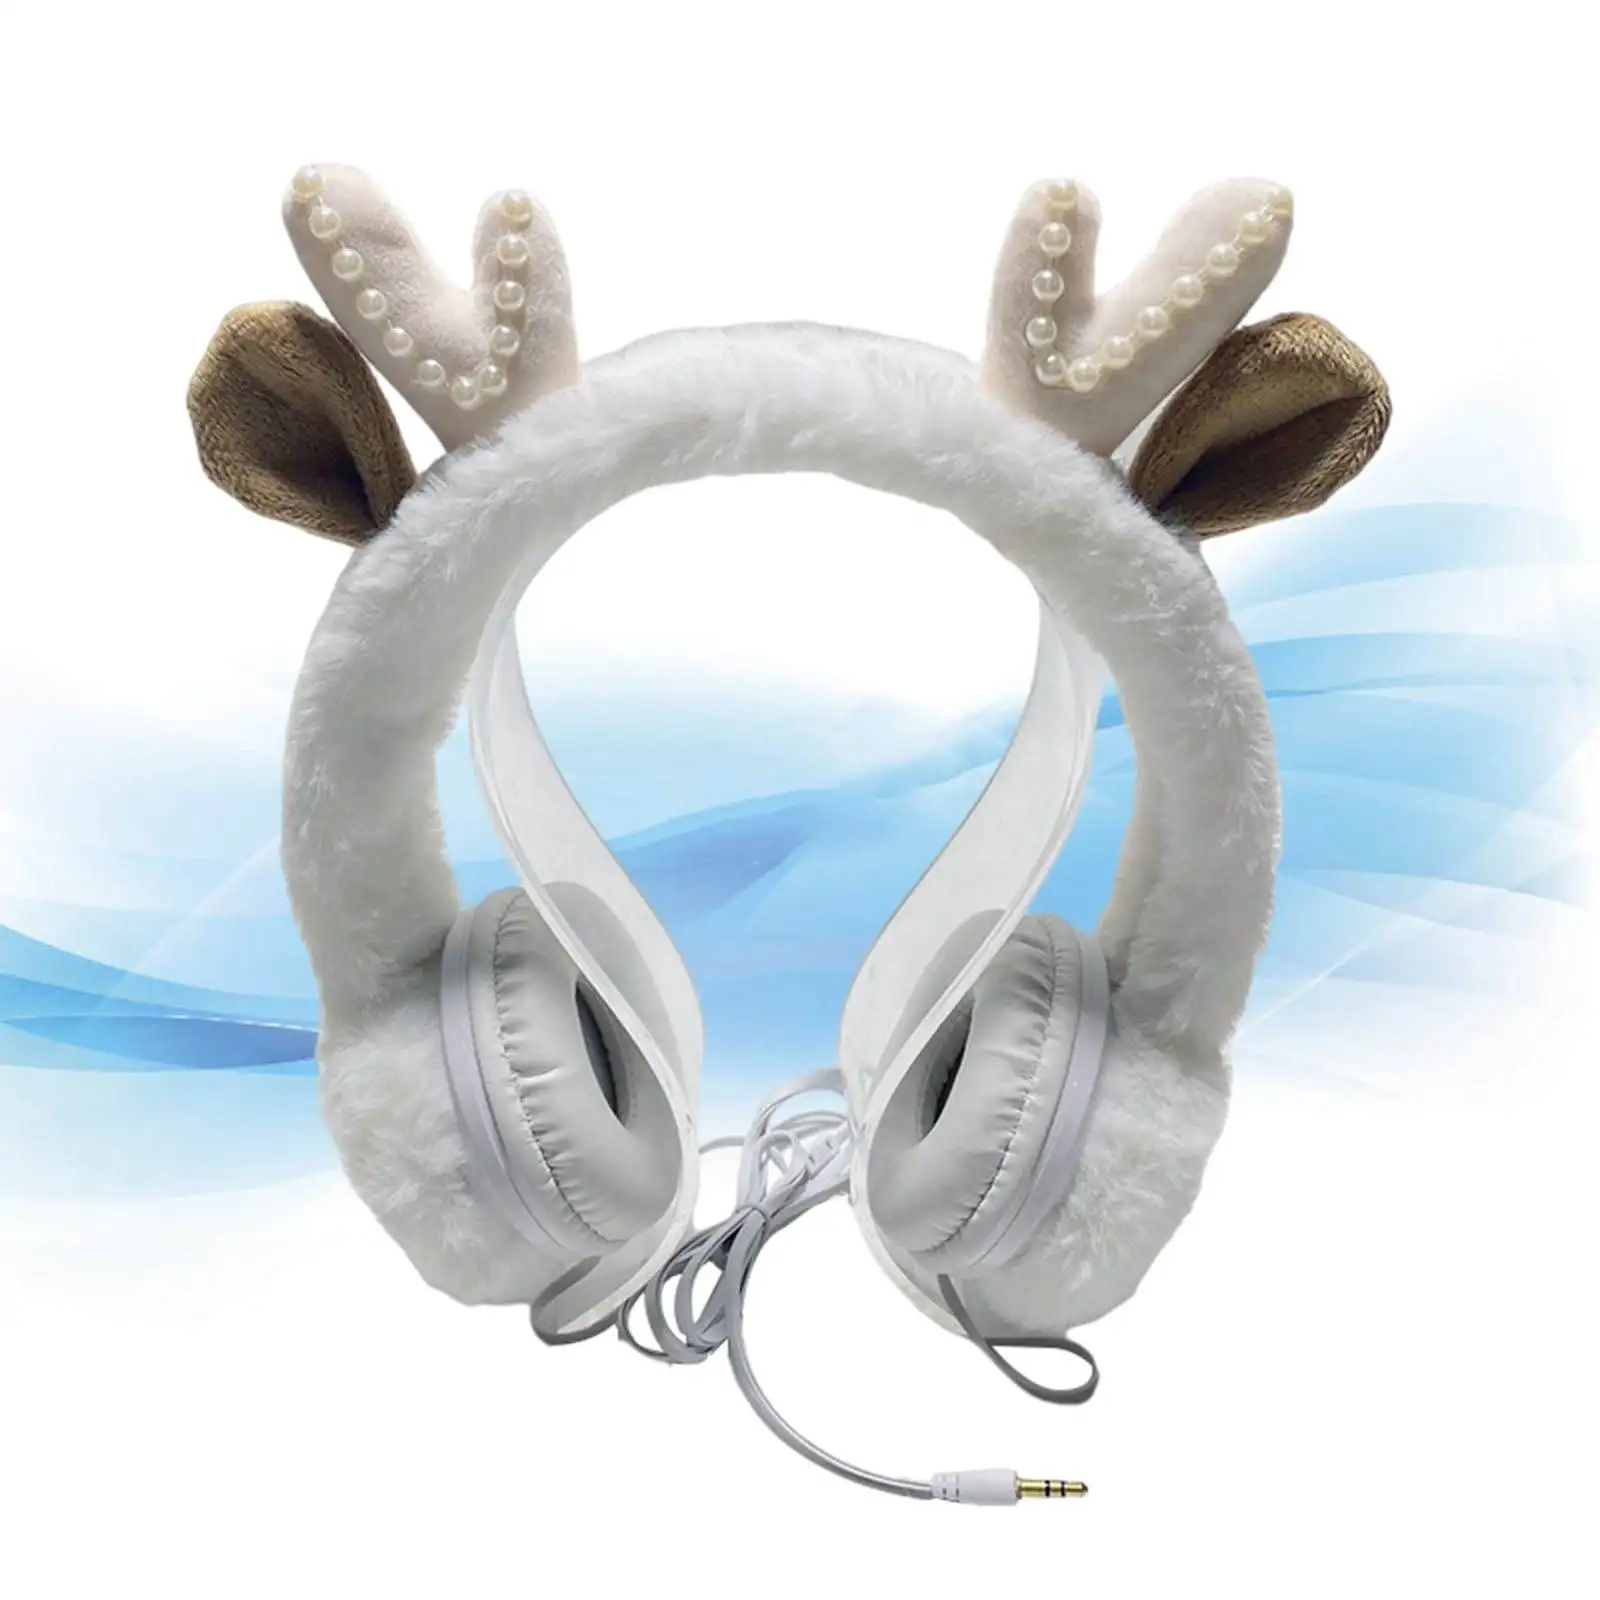 Wired Plush Antlers Headset Adjustable with Microphone HiFi Earphones for Laptop Gaming Smartphones Kids Adults for PS5